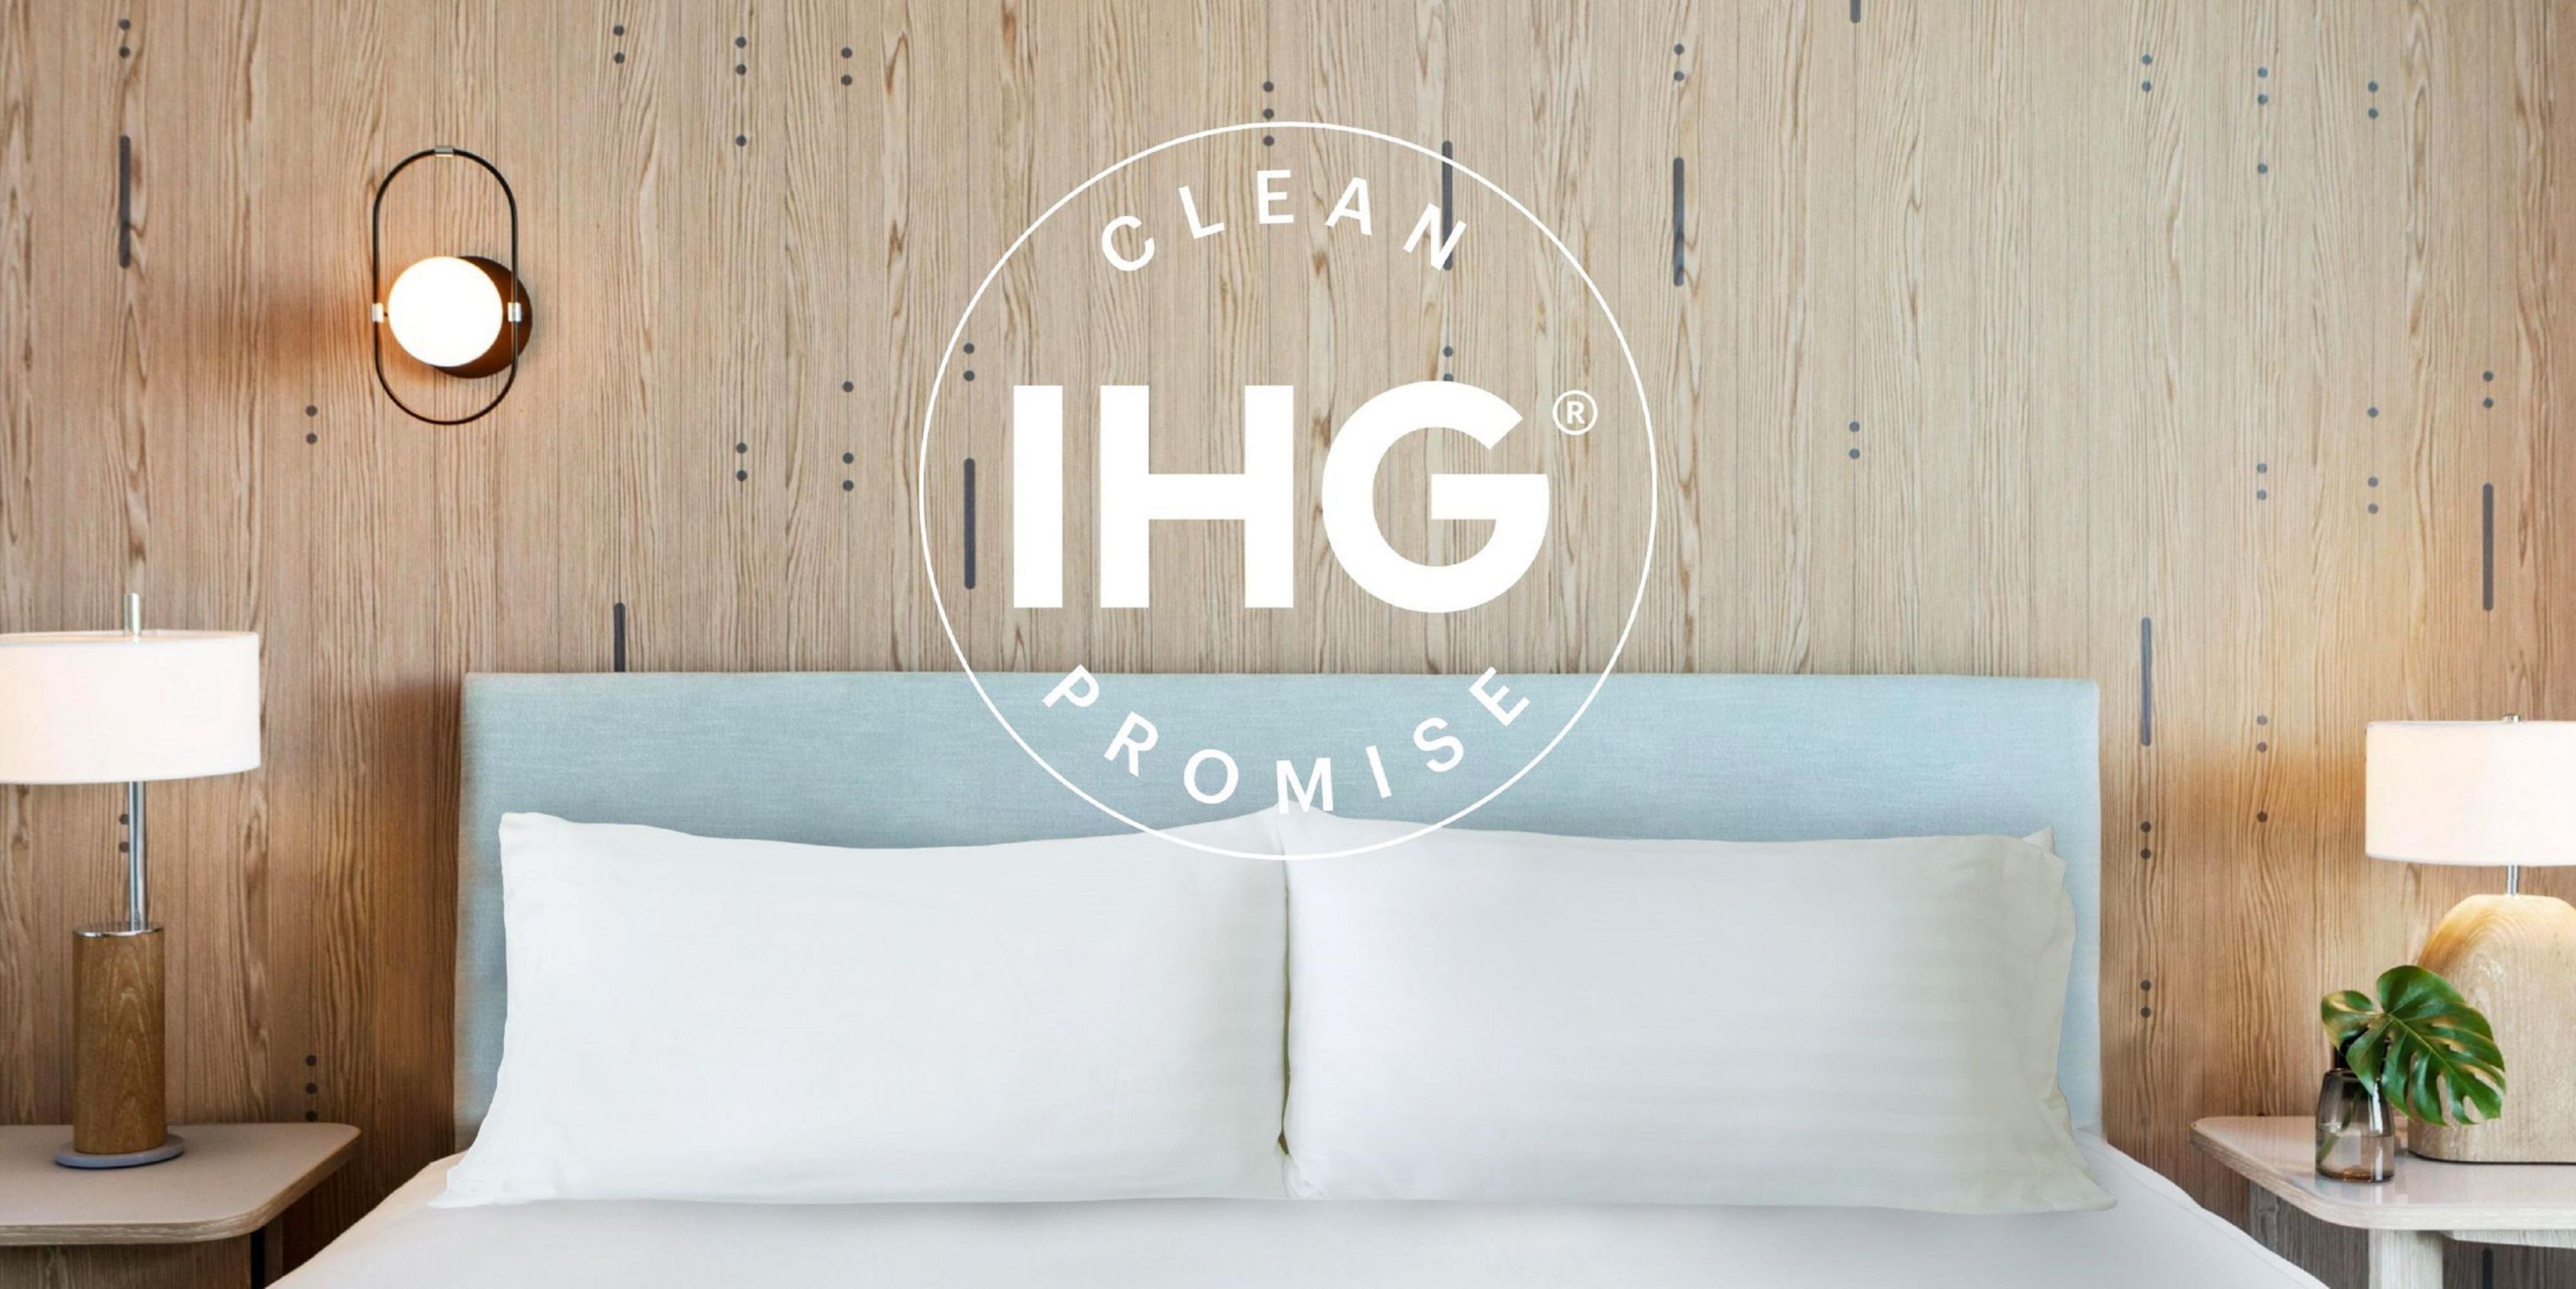 As the world adjusts to new travel norms and expectations, we’re enhancing the experience for you – our hotel guests – by redefining cleanliness and supporting your wellbeing throughout your stay.